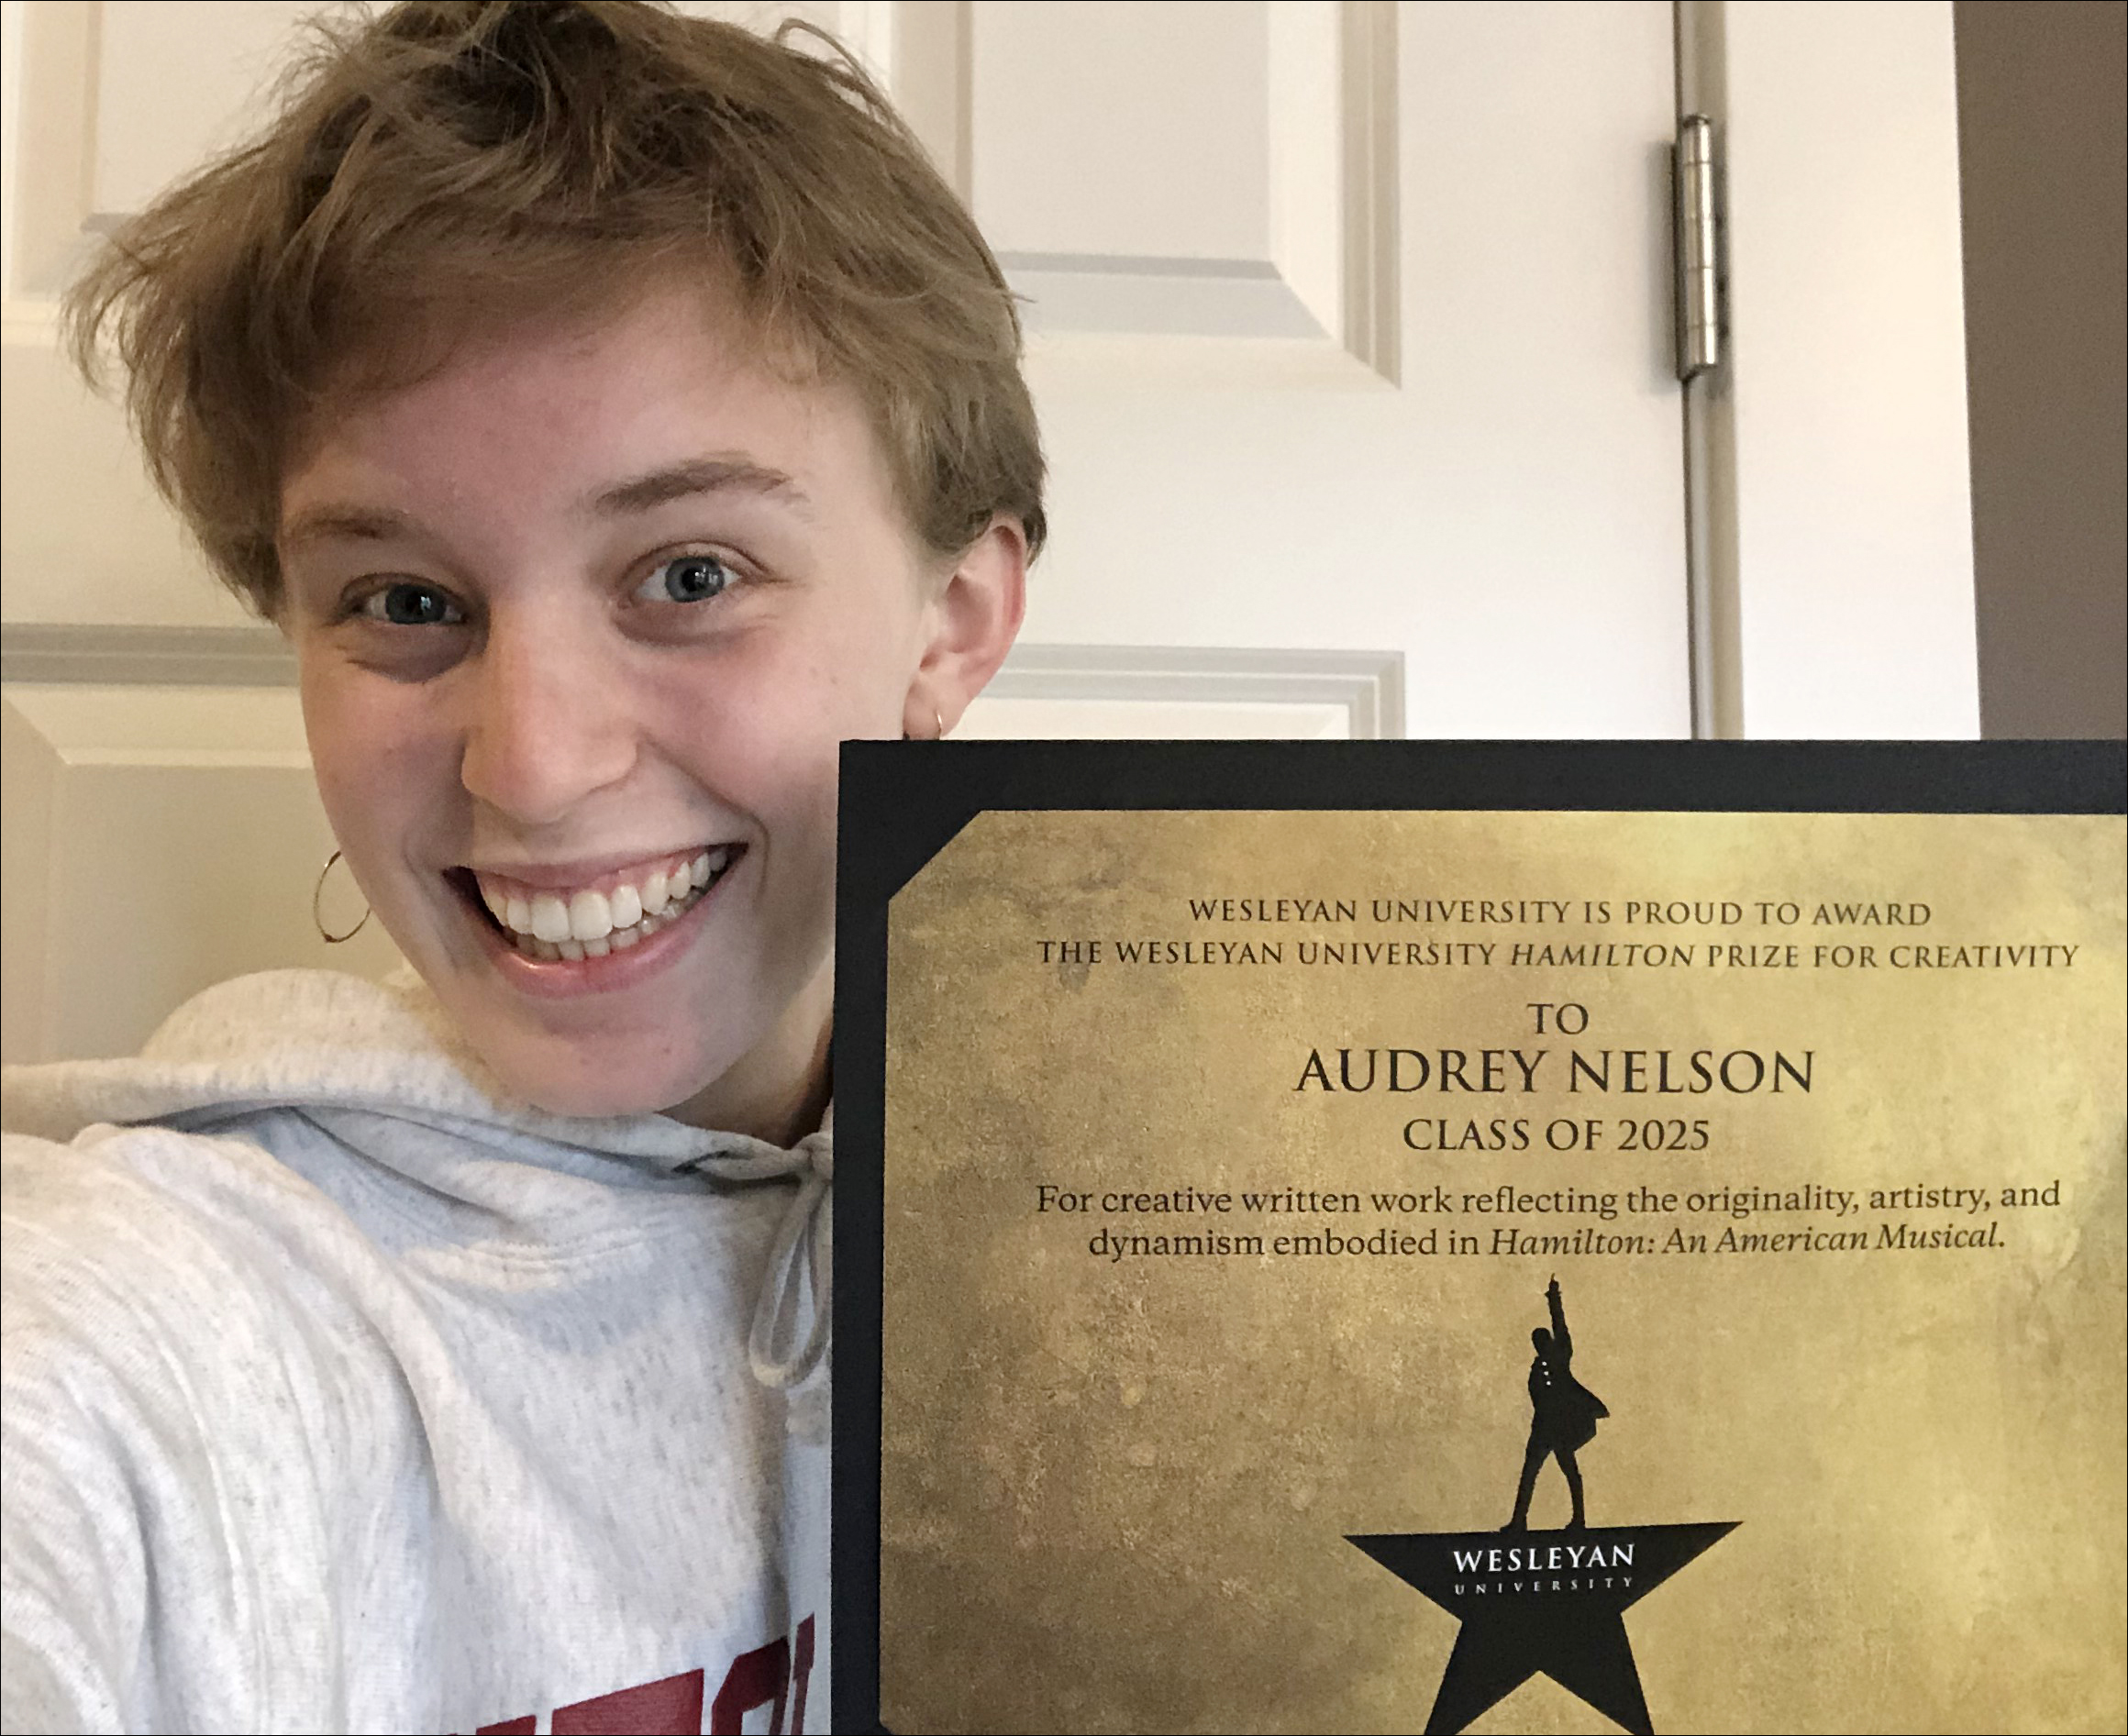 Audrey Nelson ’25 is the recipient of the 2021 Hamilton Prize for Creativity, which comes with a four-year, full-tuition scholarship to attend Wesleyan University.